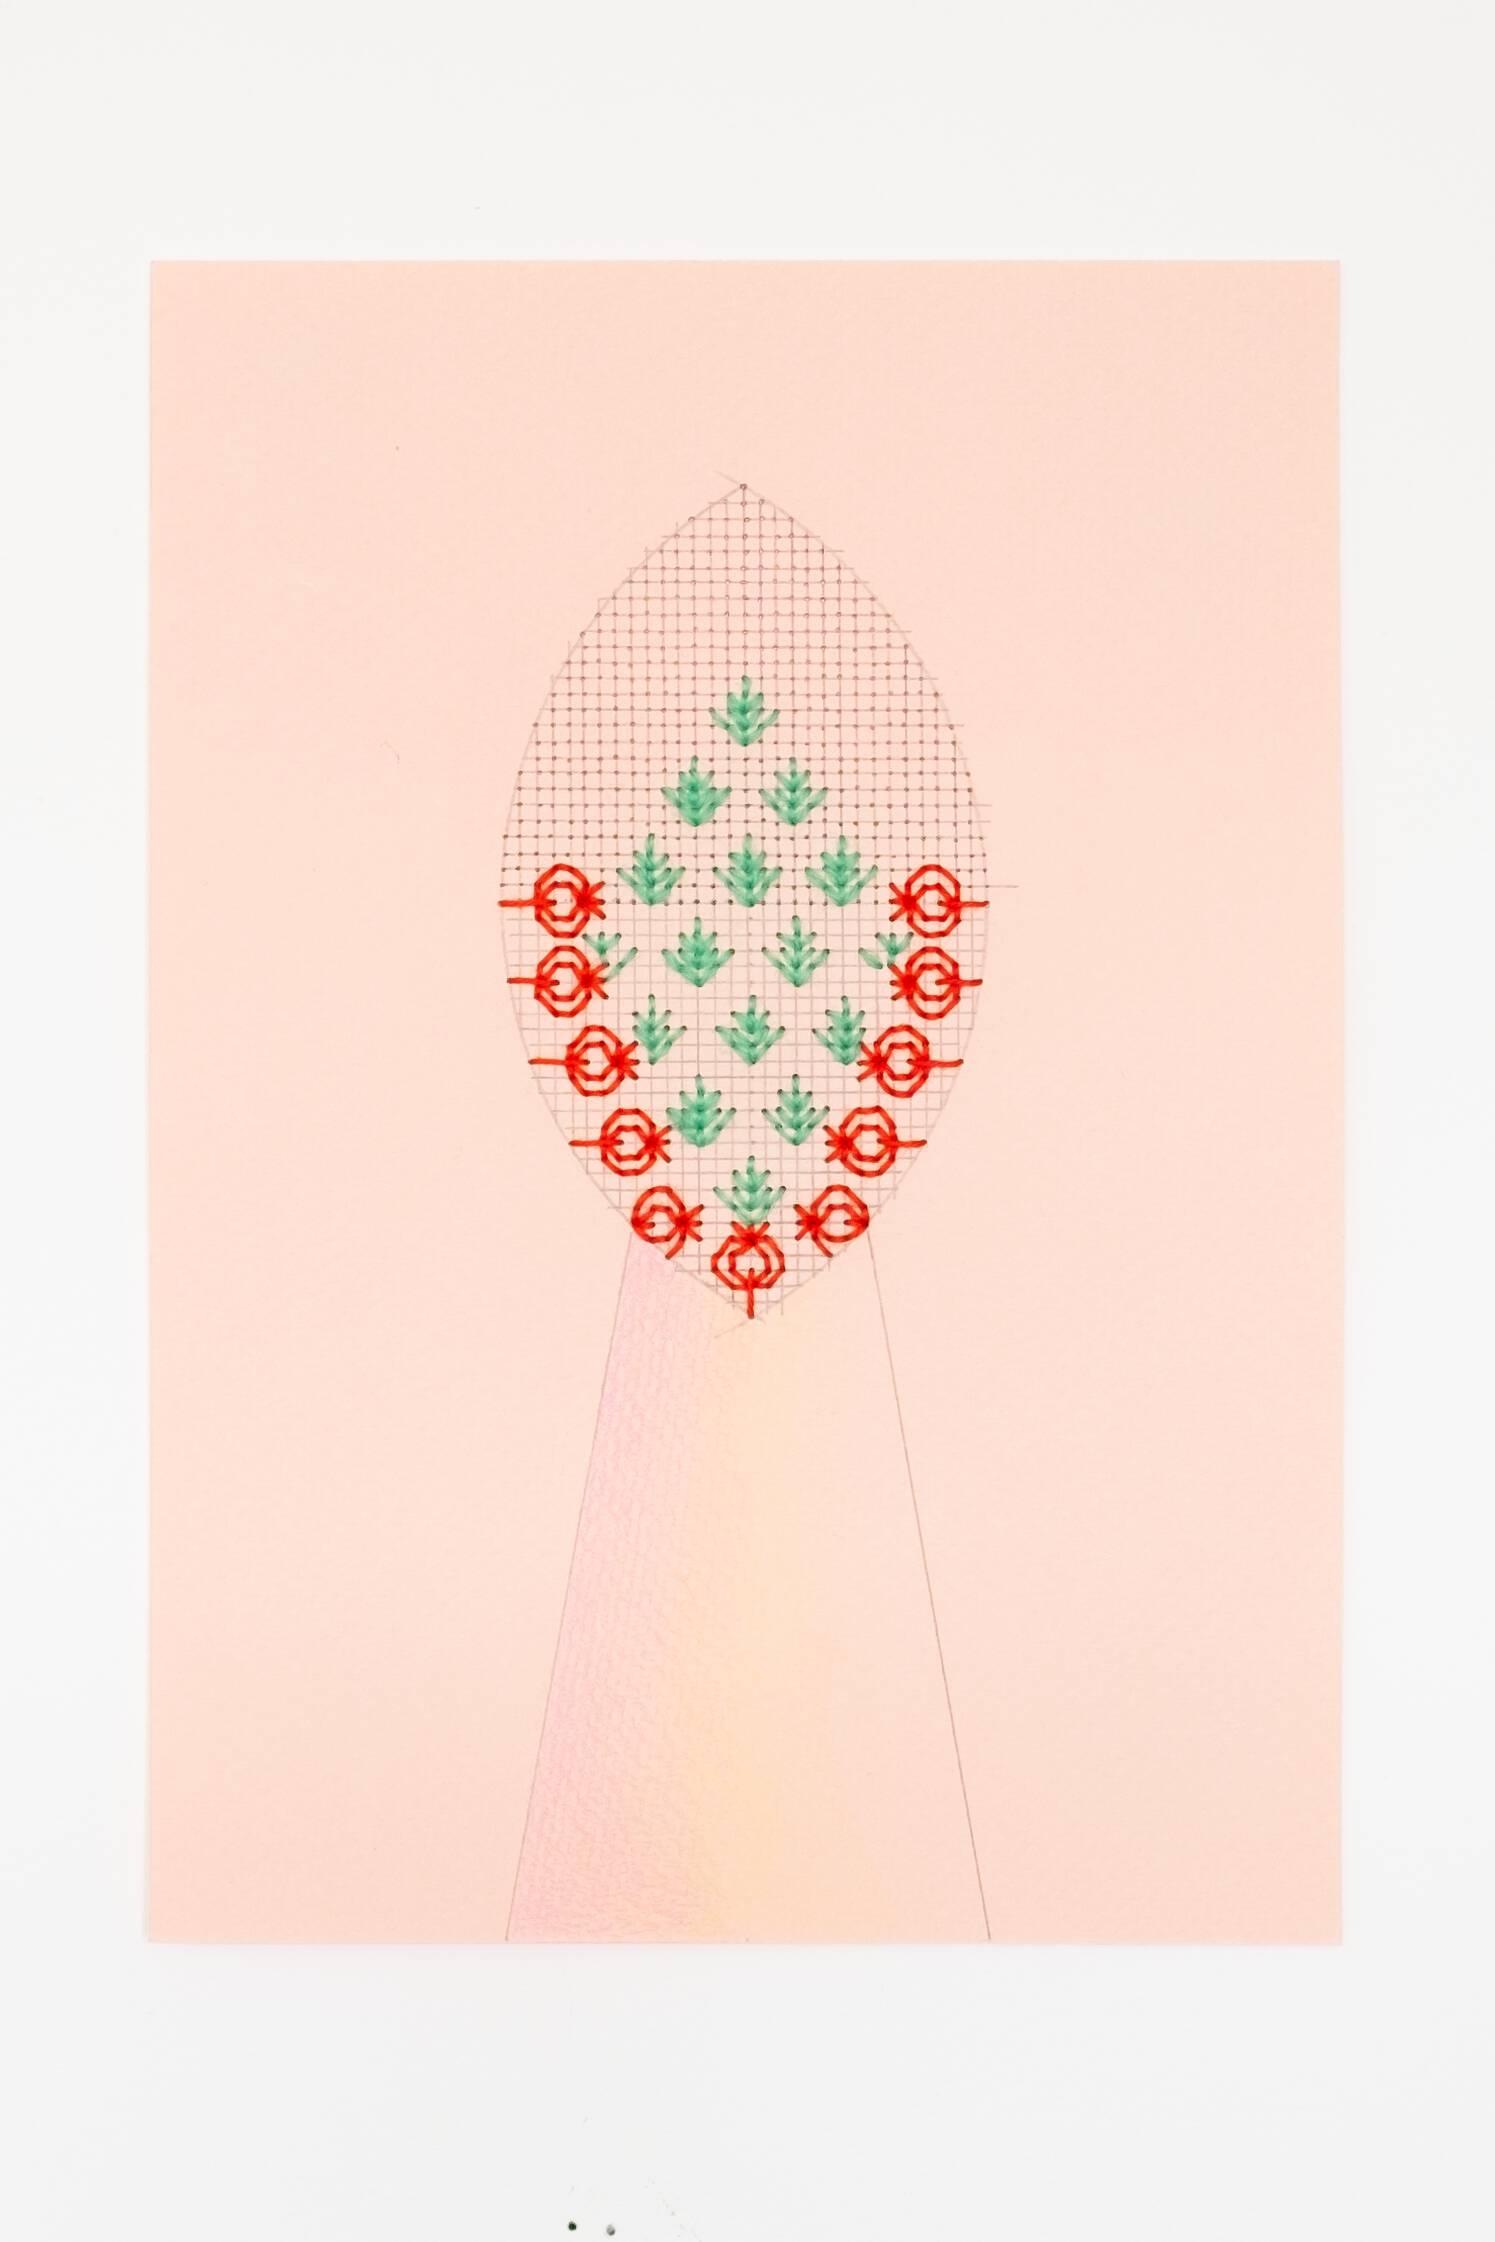 Blackwork vesica piscis [red-teal on peach], Hand-embroidered cotton, pencil and colored pencil on paper, 2020